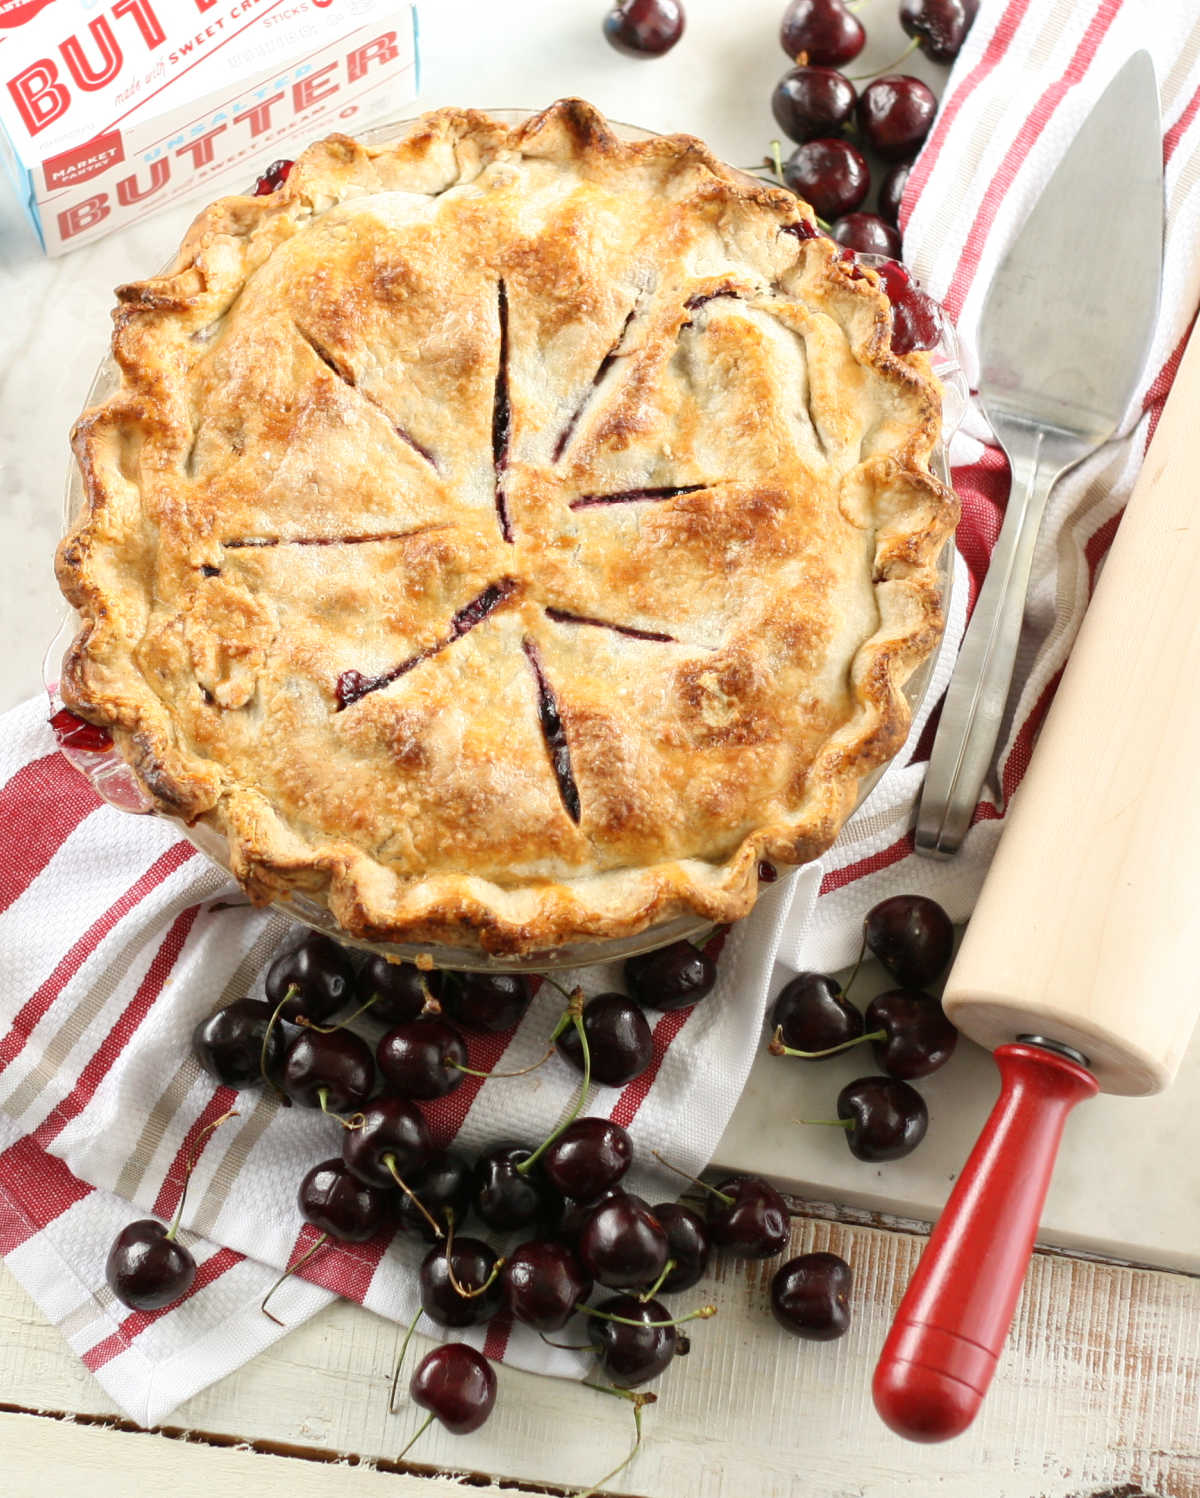 Cherry pie on white marble, loose fresh cherries around, red handled wooden rolling pin.